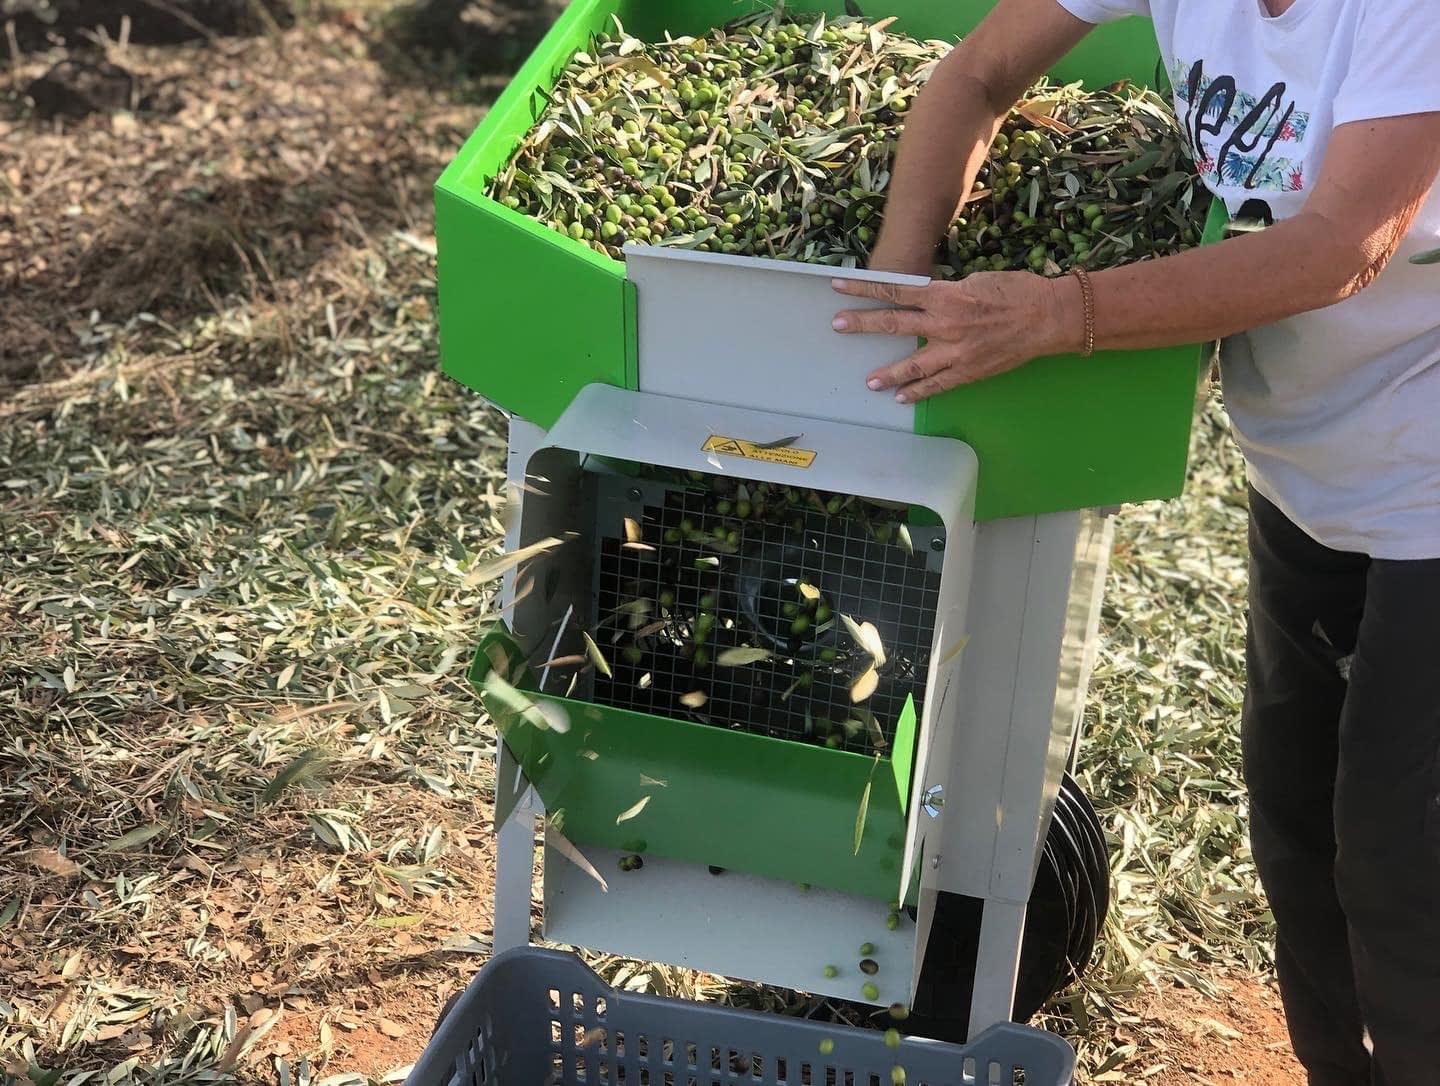 the-best-olive-oils-competitions-production-europe-in-portugal-a-tough-season-ends-with-stronger-determination-olive-oil-times